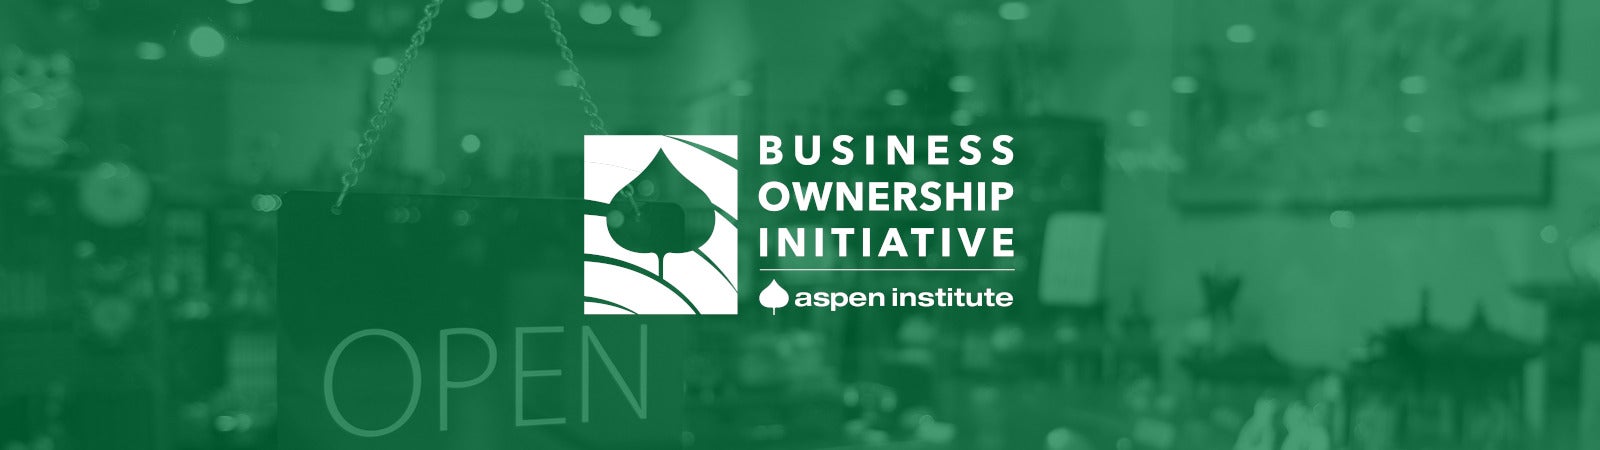 Testimony of Joyce Klein, Aspen Institute Business Ownership Initiative and Responsible Business Lending Coalition before the Maryland House of Delegates Economic Matters Committee on HR 0574 Commercial Financing – Small Business Truth in Lending Act